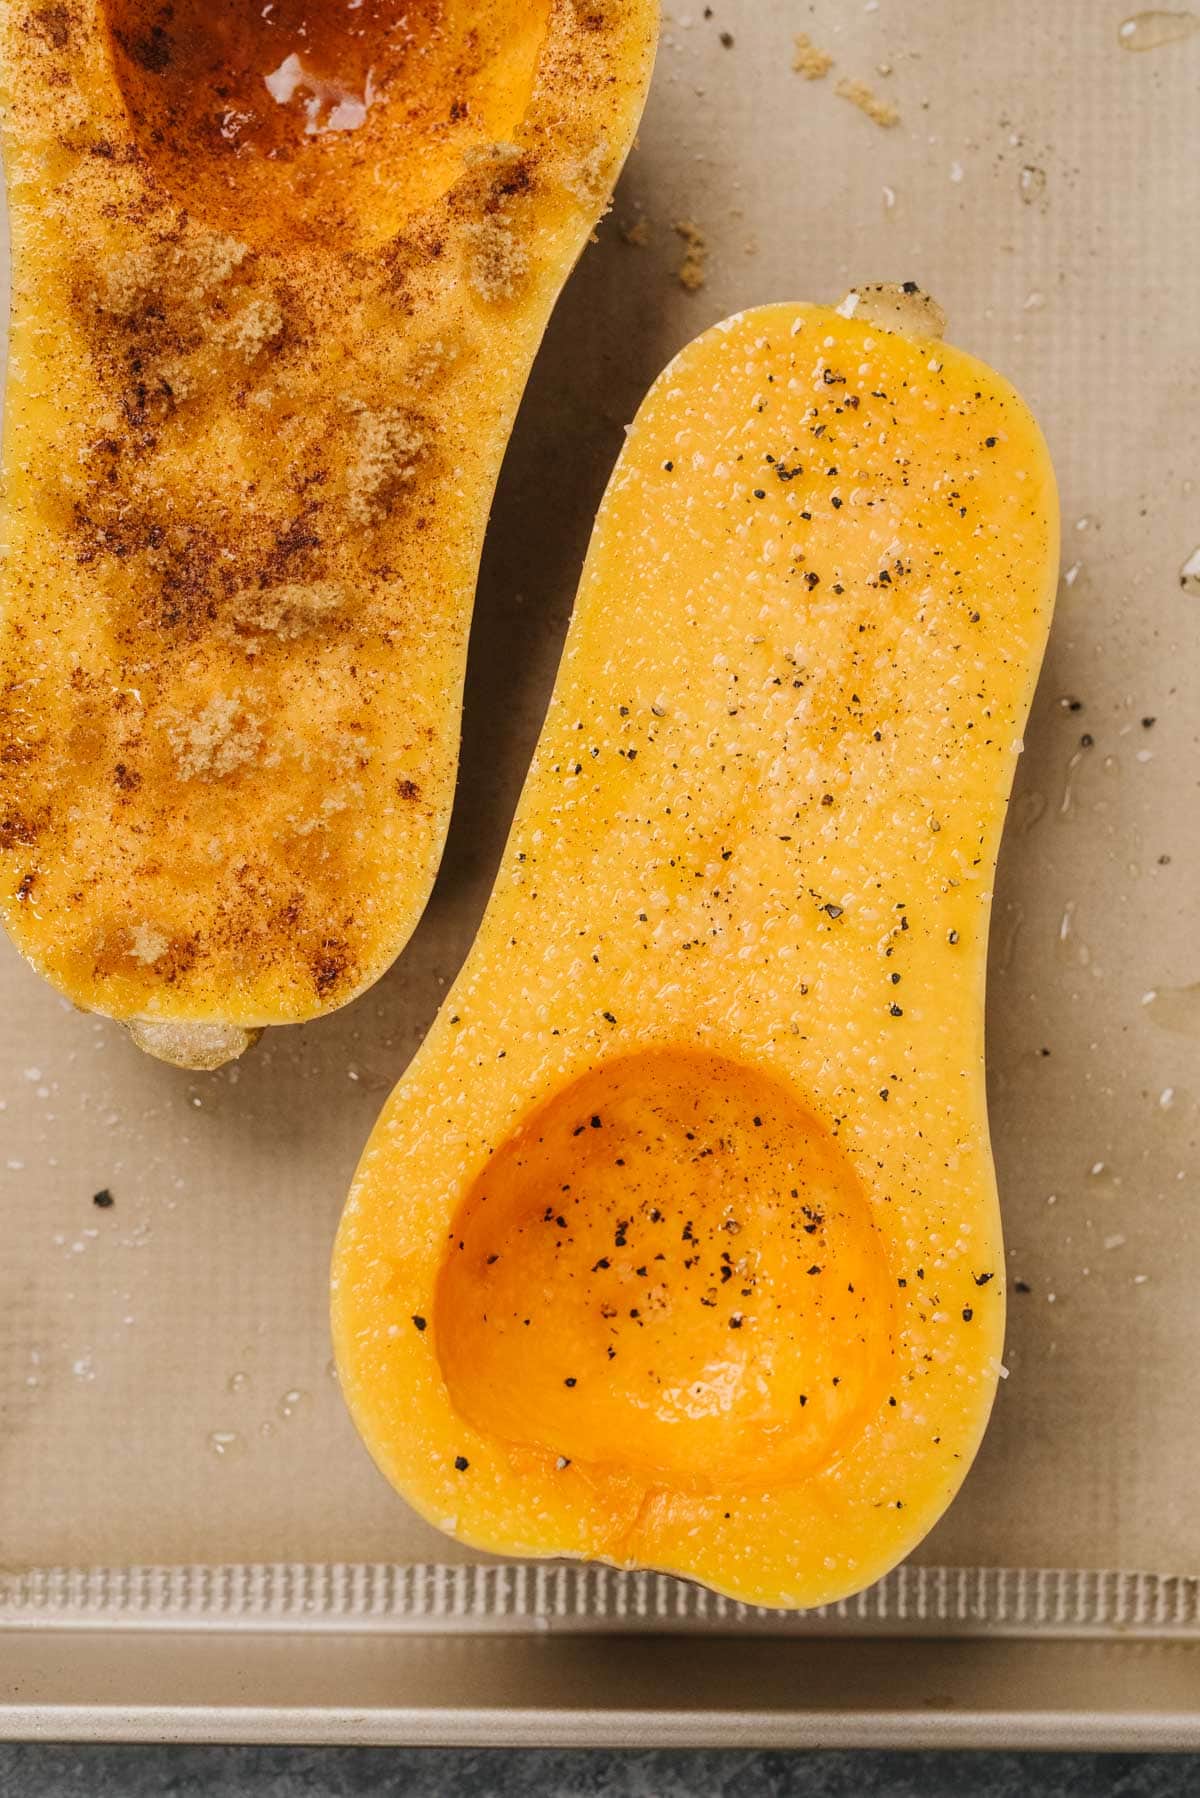 Butternut squash halves drizzled with olive oil, salt, pepper, and seasonings on a parchment lined baking sheet.